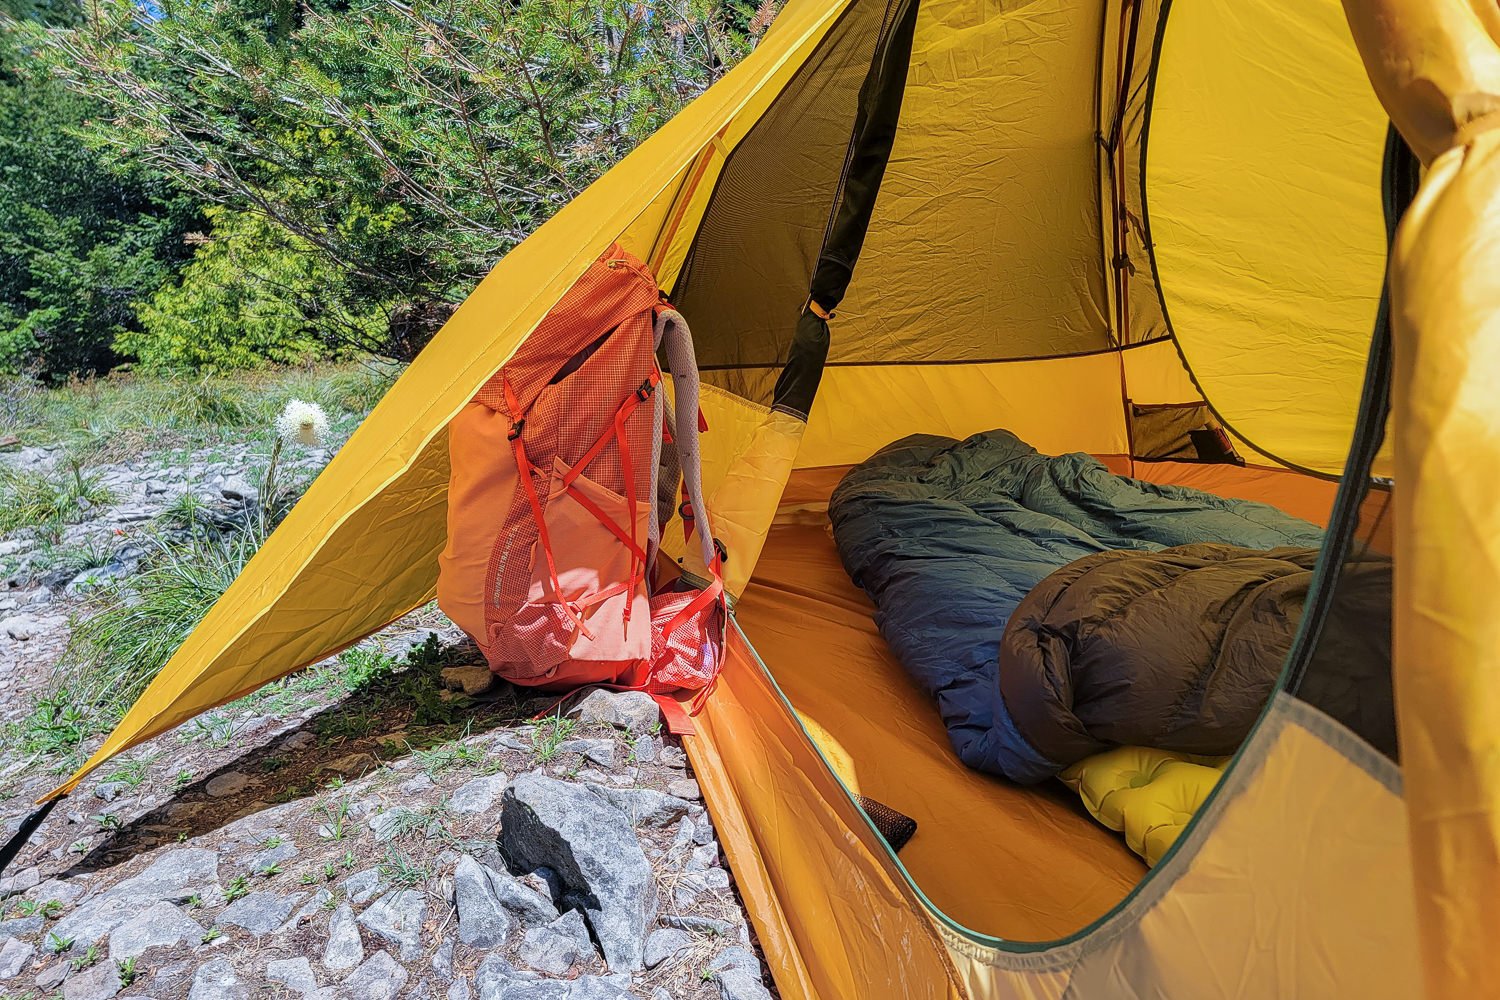 A few of the vestibules of the Trailmade 2 tent with a backpack under the rain fly